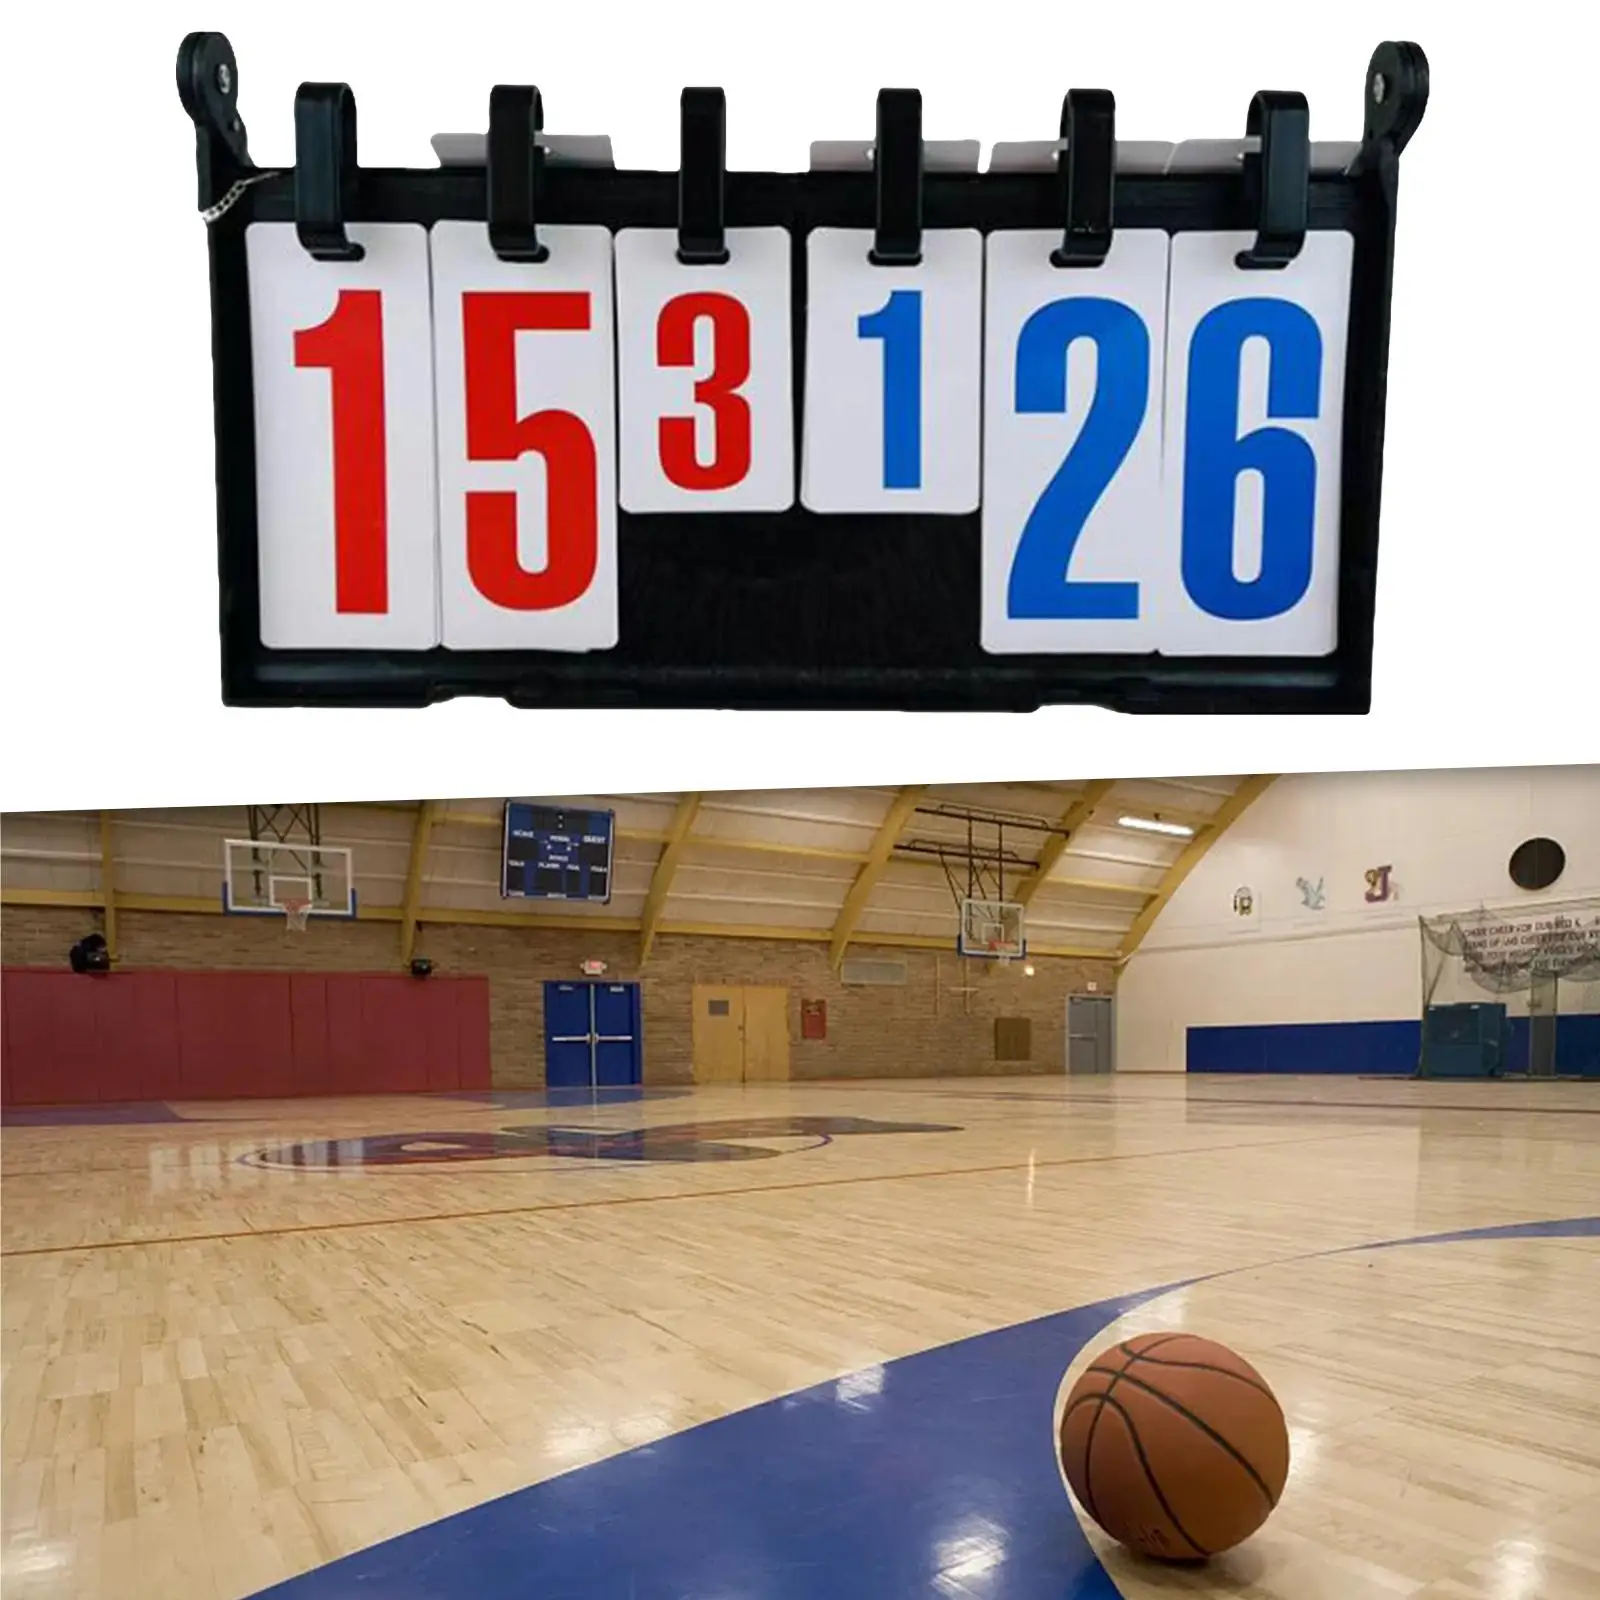 Sport Scoreboard Tabletop or Hanging 6 Digit for Soccer Volleyball Hockey